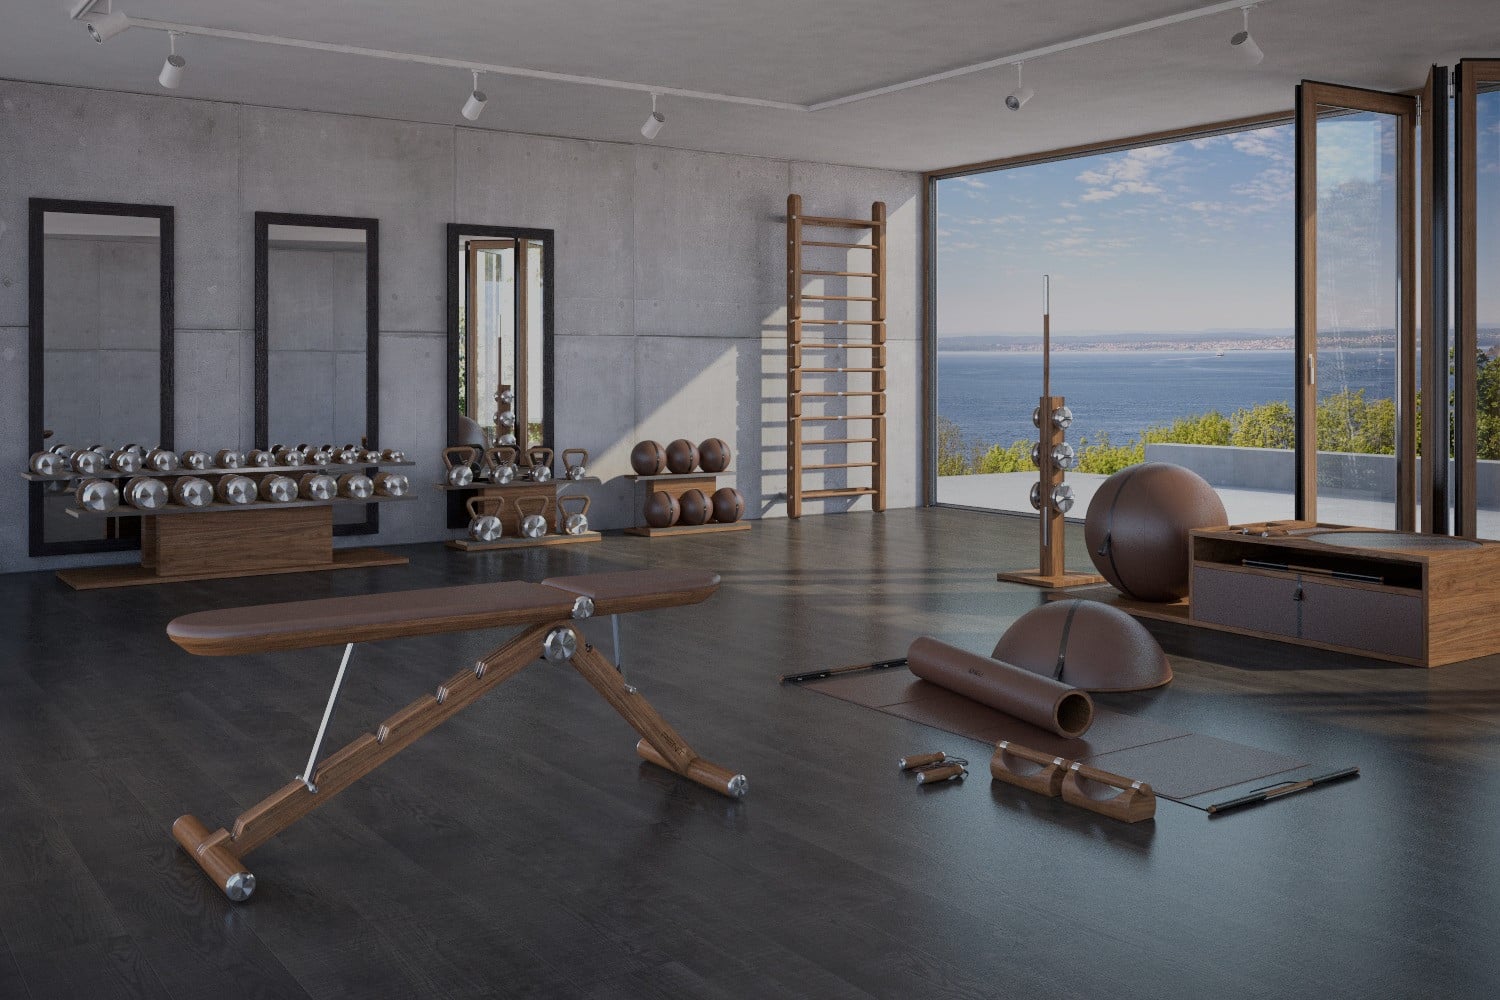 Gym interior design ideas from the experts - motive8